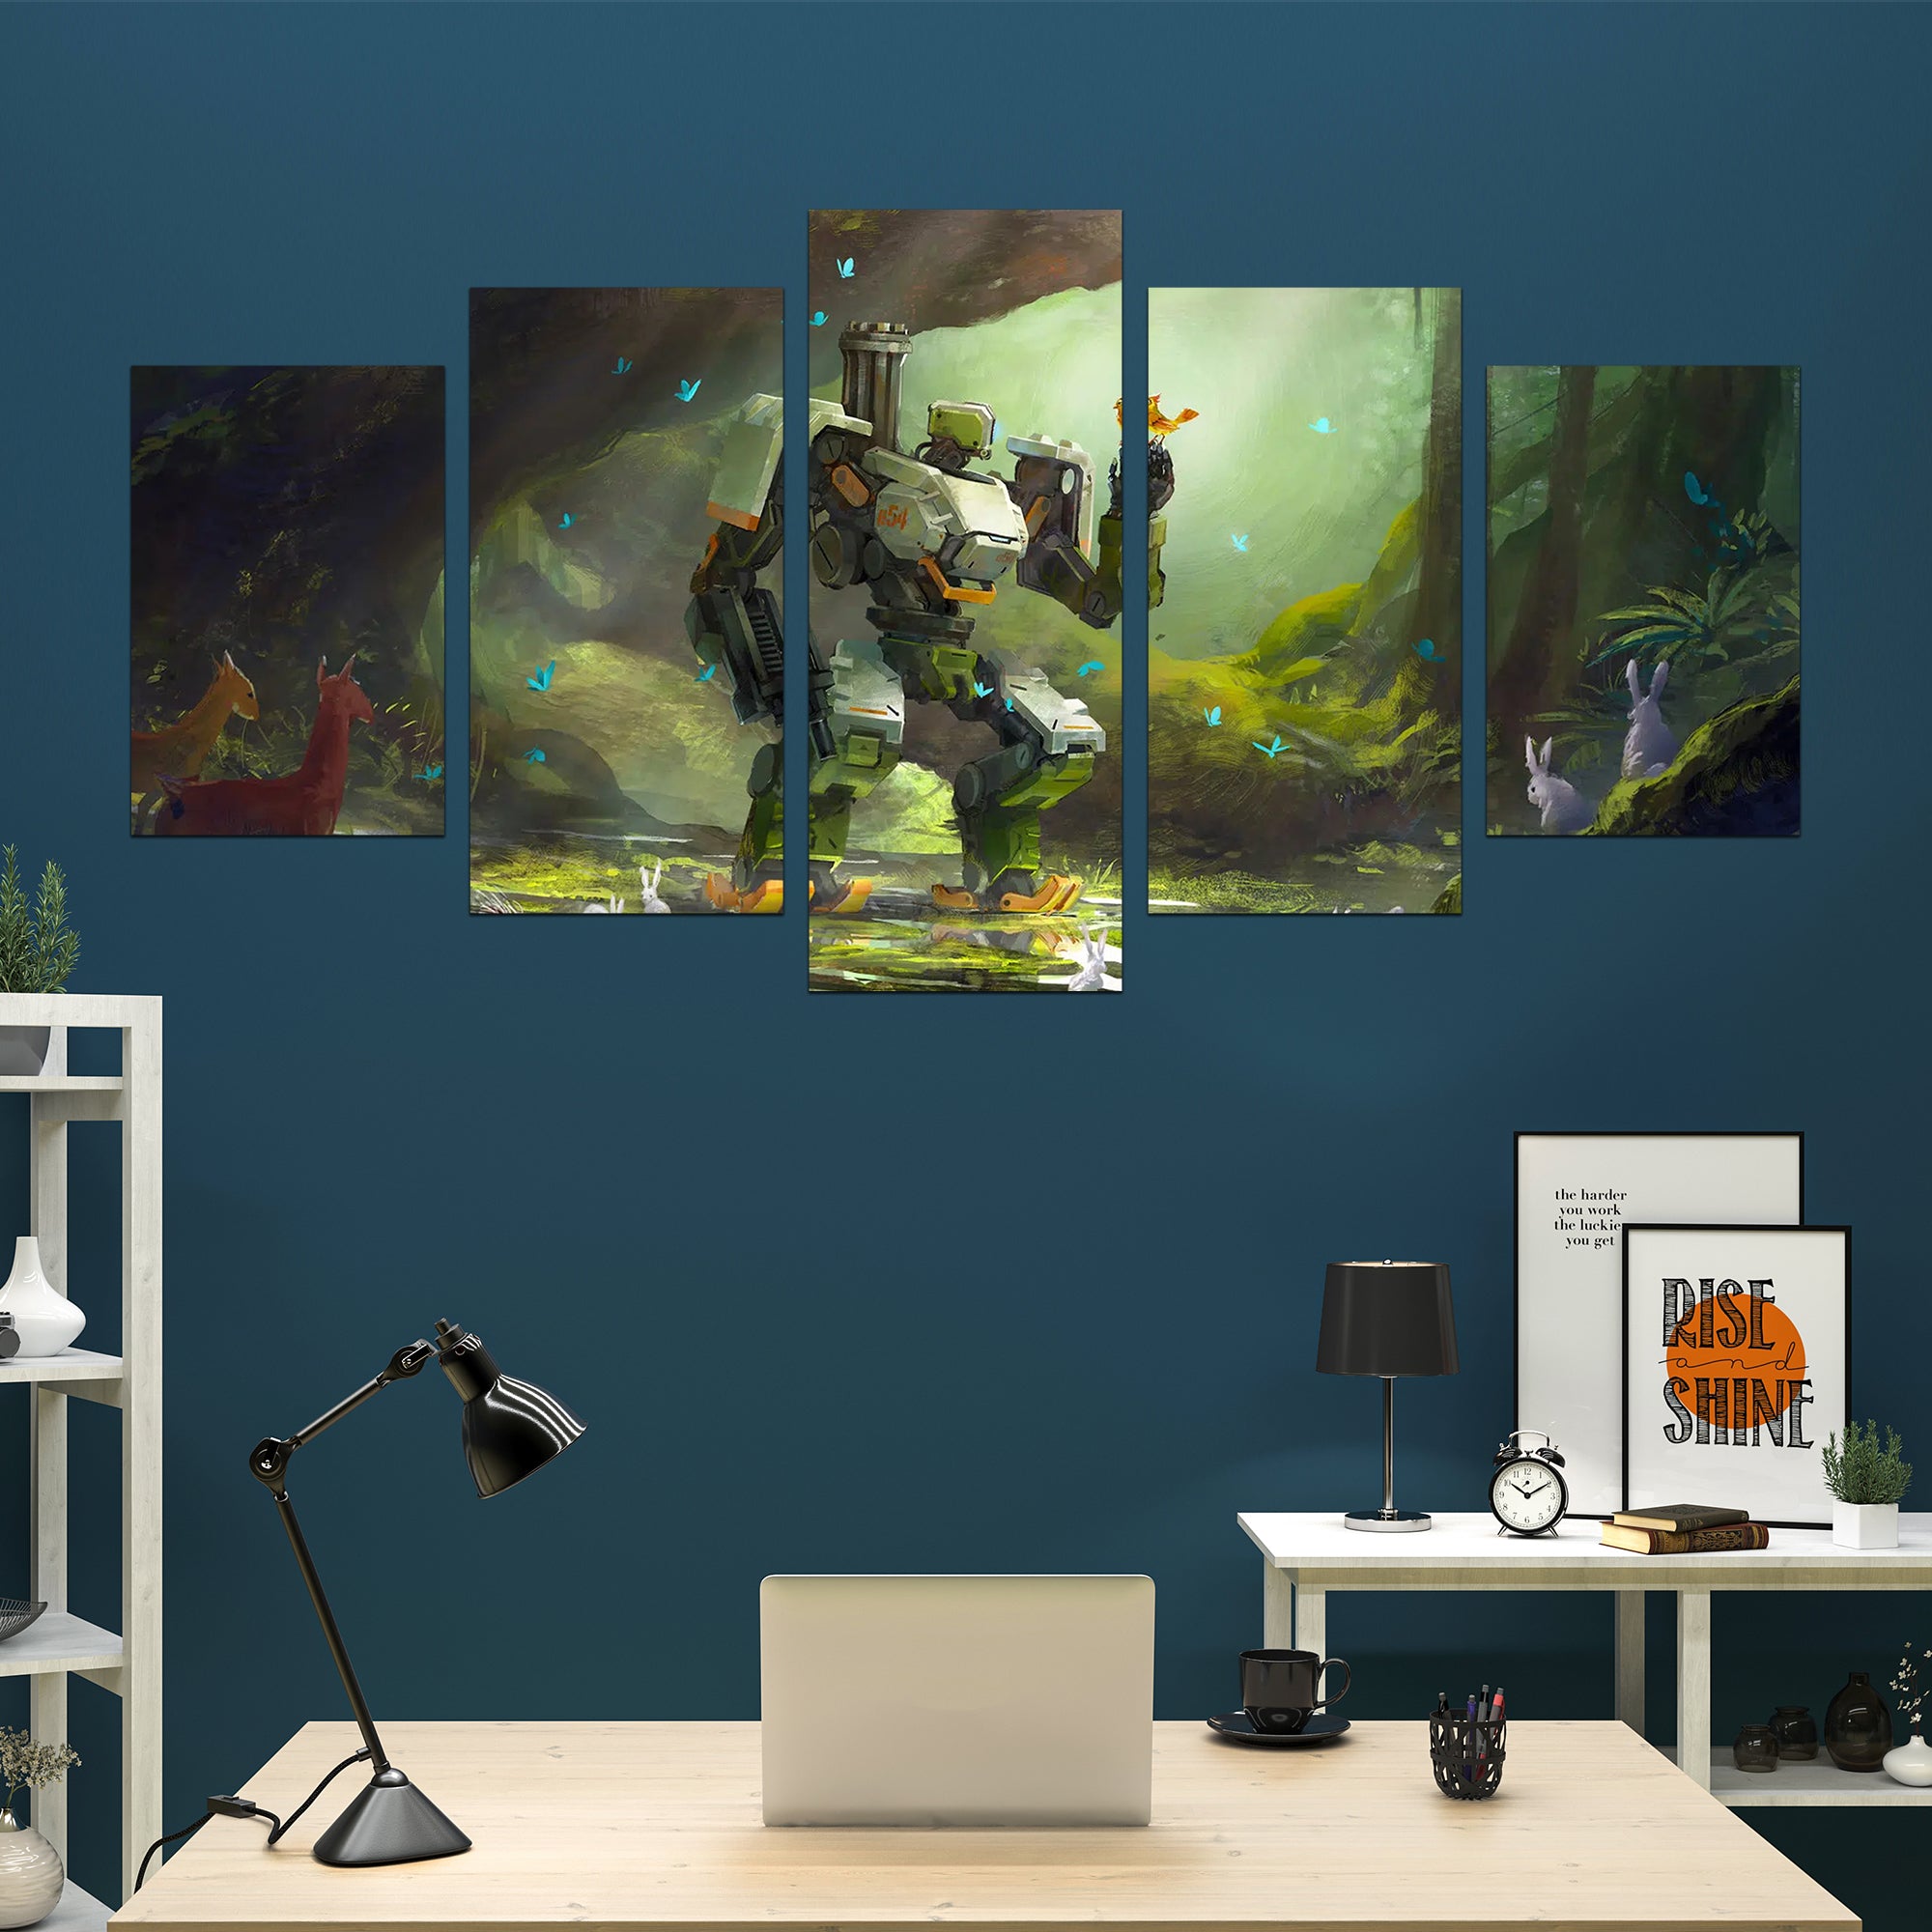 Captivating Bastion Canvas Art: Durable, Unique, and Ready to Hang